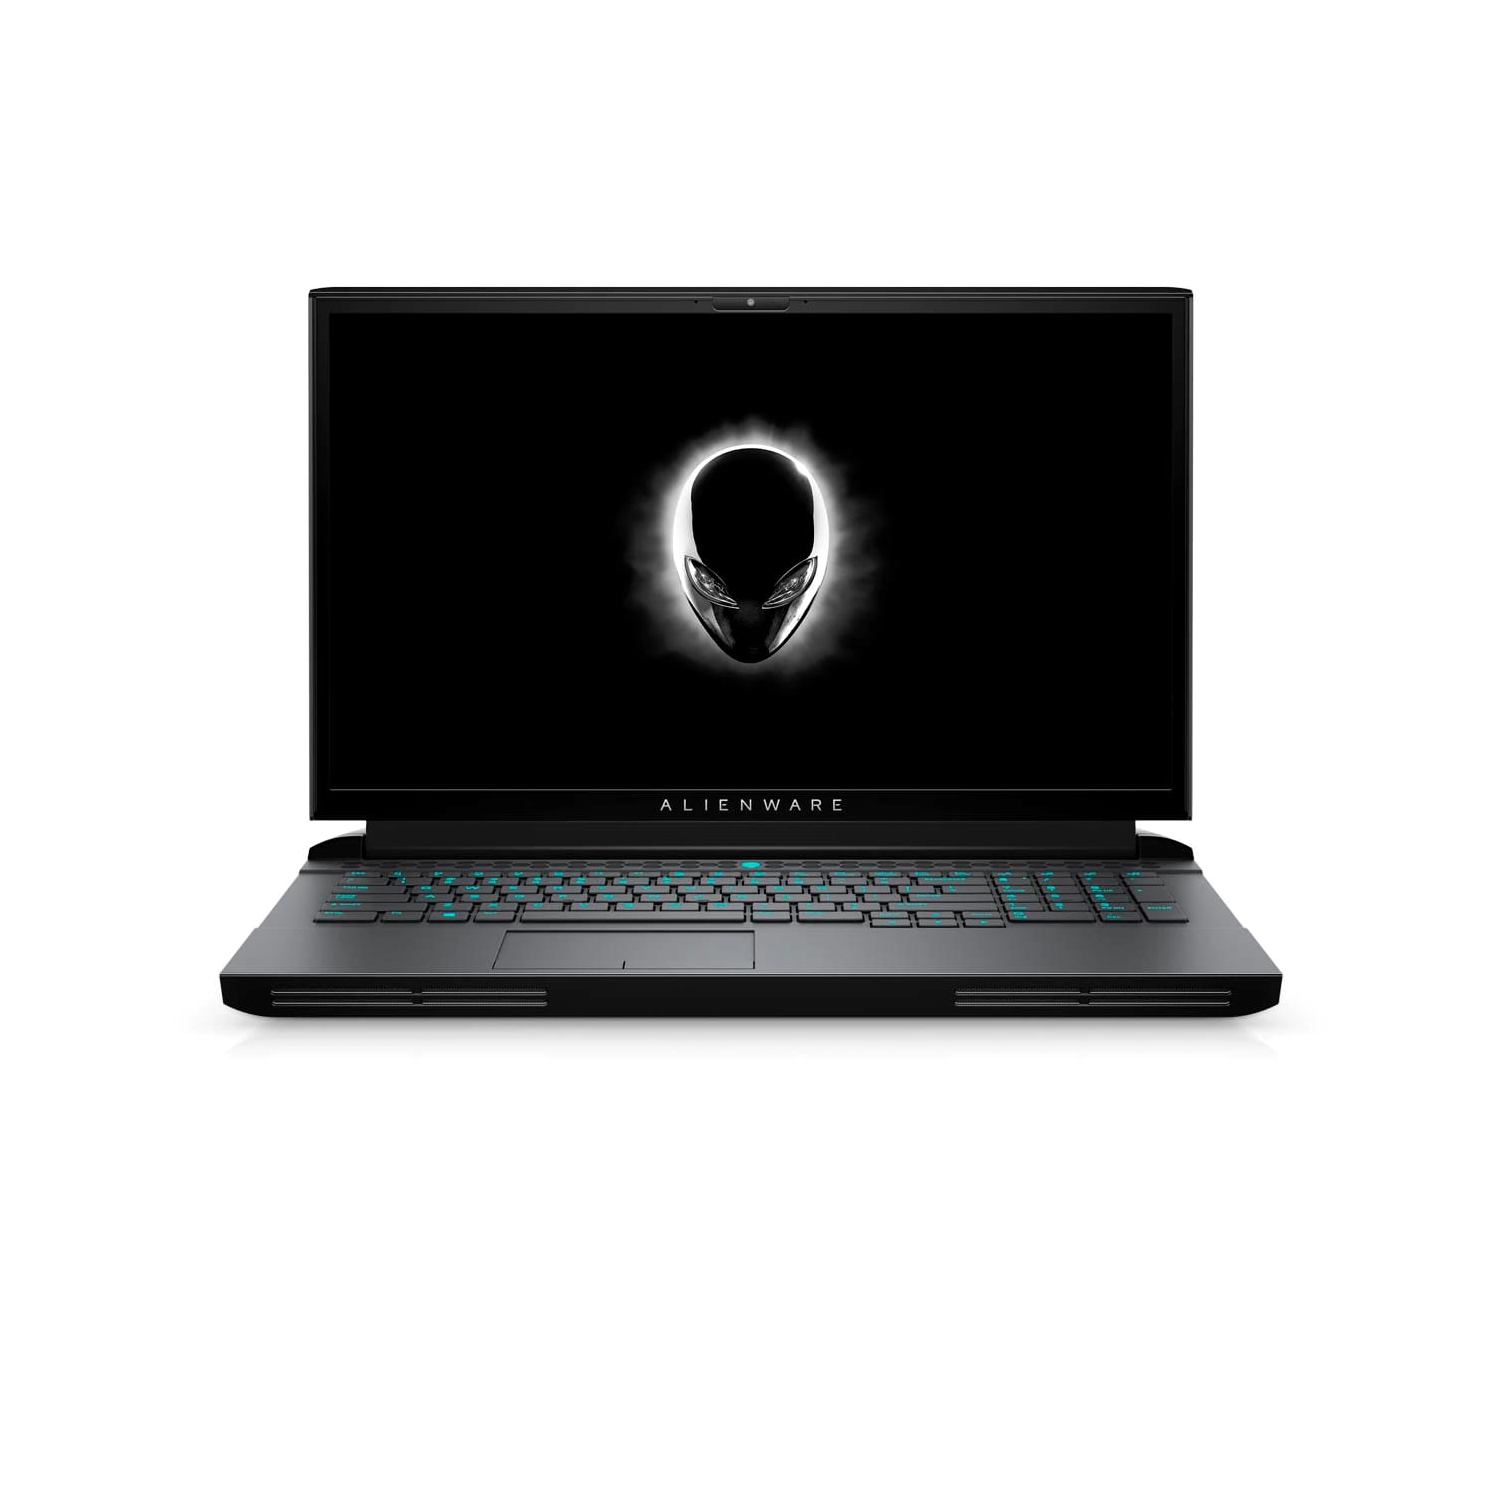 Refurbished (Excellent) - Dell Alienware 17 51m R2 Gaming Laptop (2020), 17.3" FHD, Core i7 - 1TB SSD + 1TB SSD - 64GB RAM - 2070 Super, 5.1 GHz - 10th Gen CPU Certified